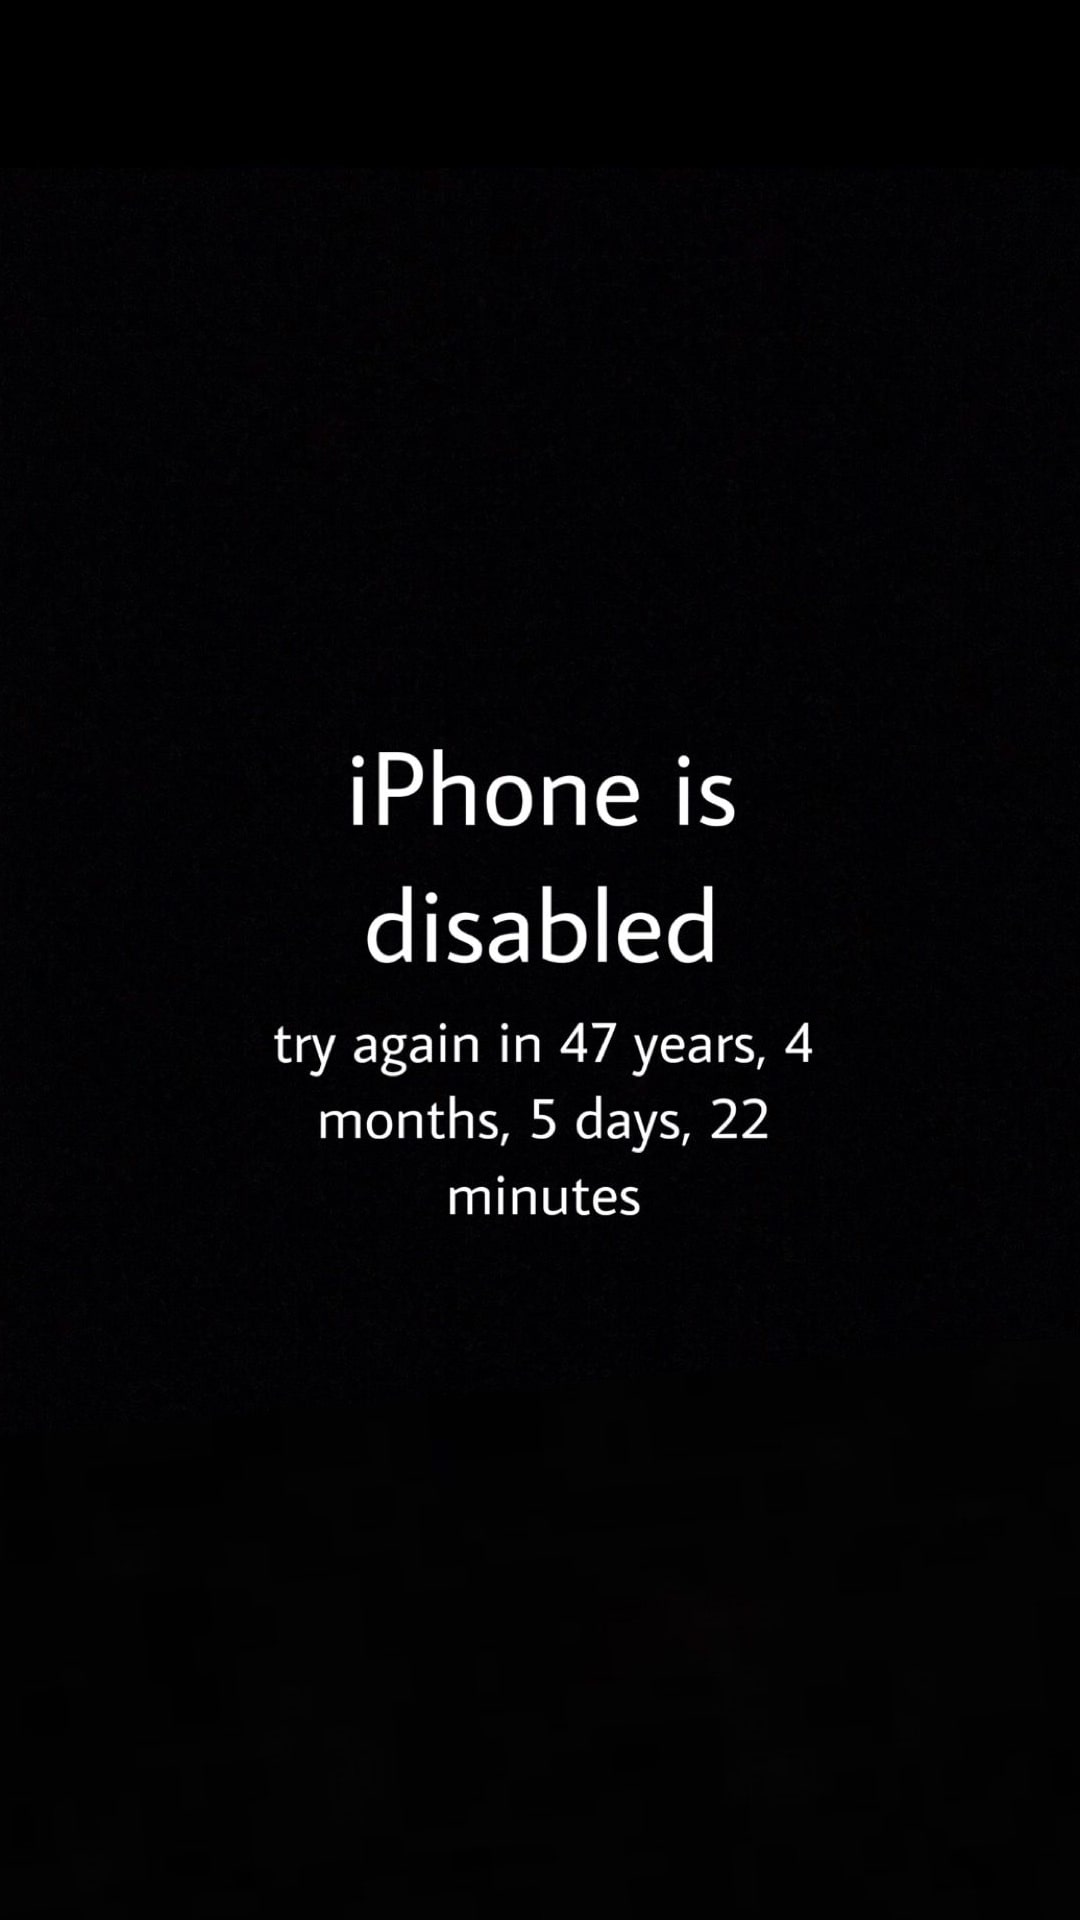 IPhone is disabled again disabled five in iphone is minutes quotes  try HD phone wallpaper  Peakpx